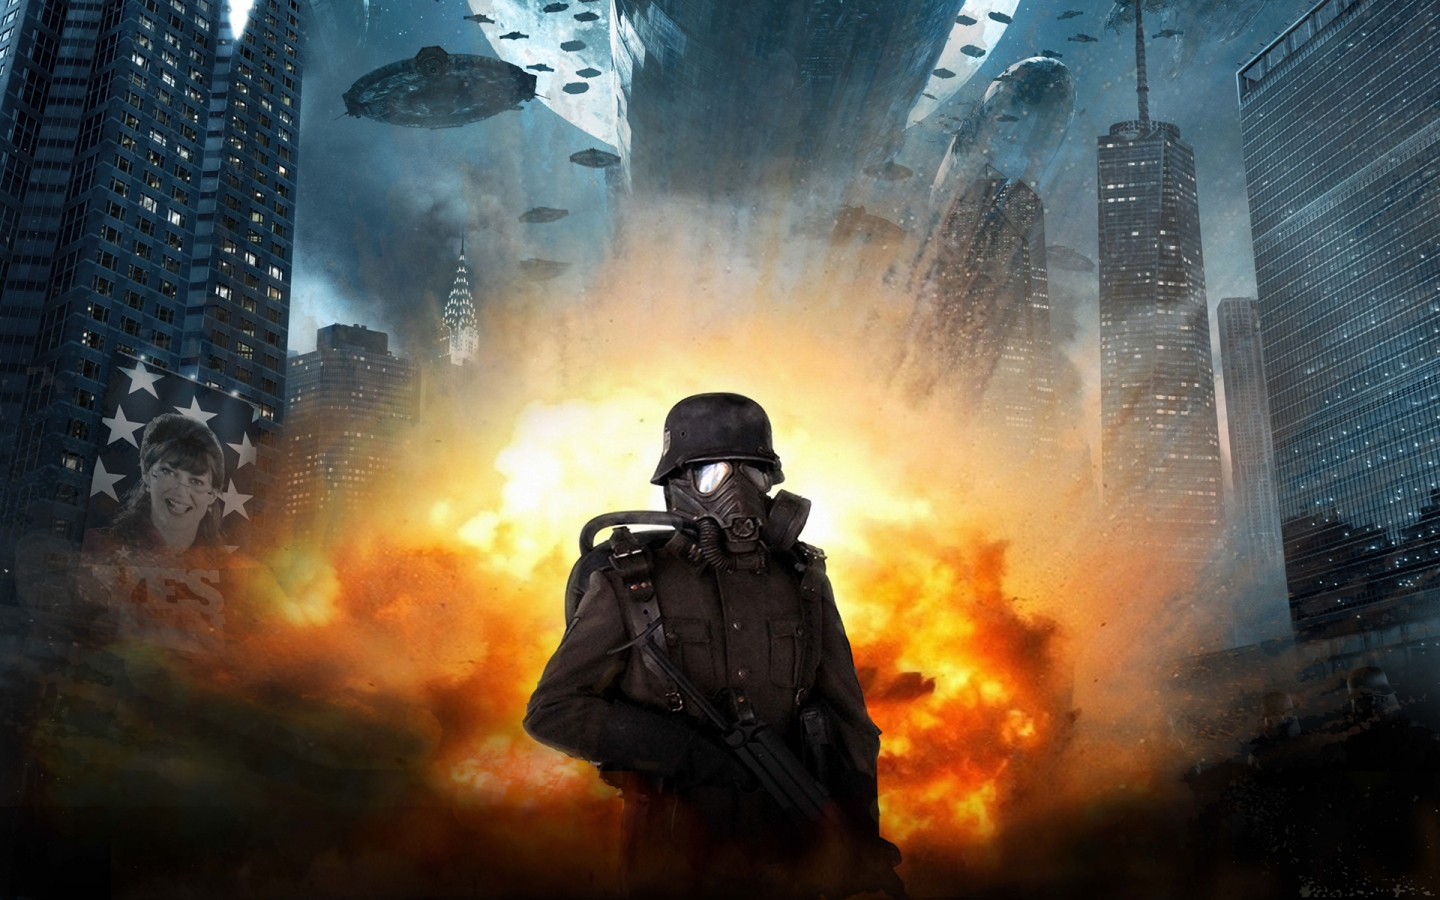 Iron Sky Soldier for 1440 x 900 widescreen resolution